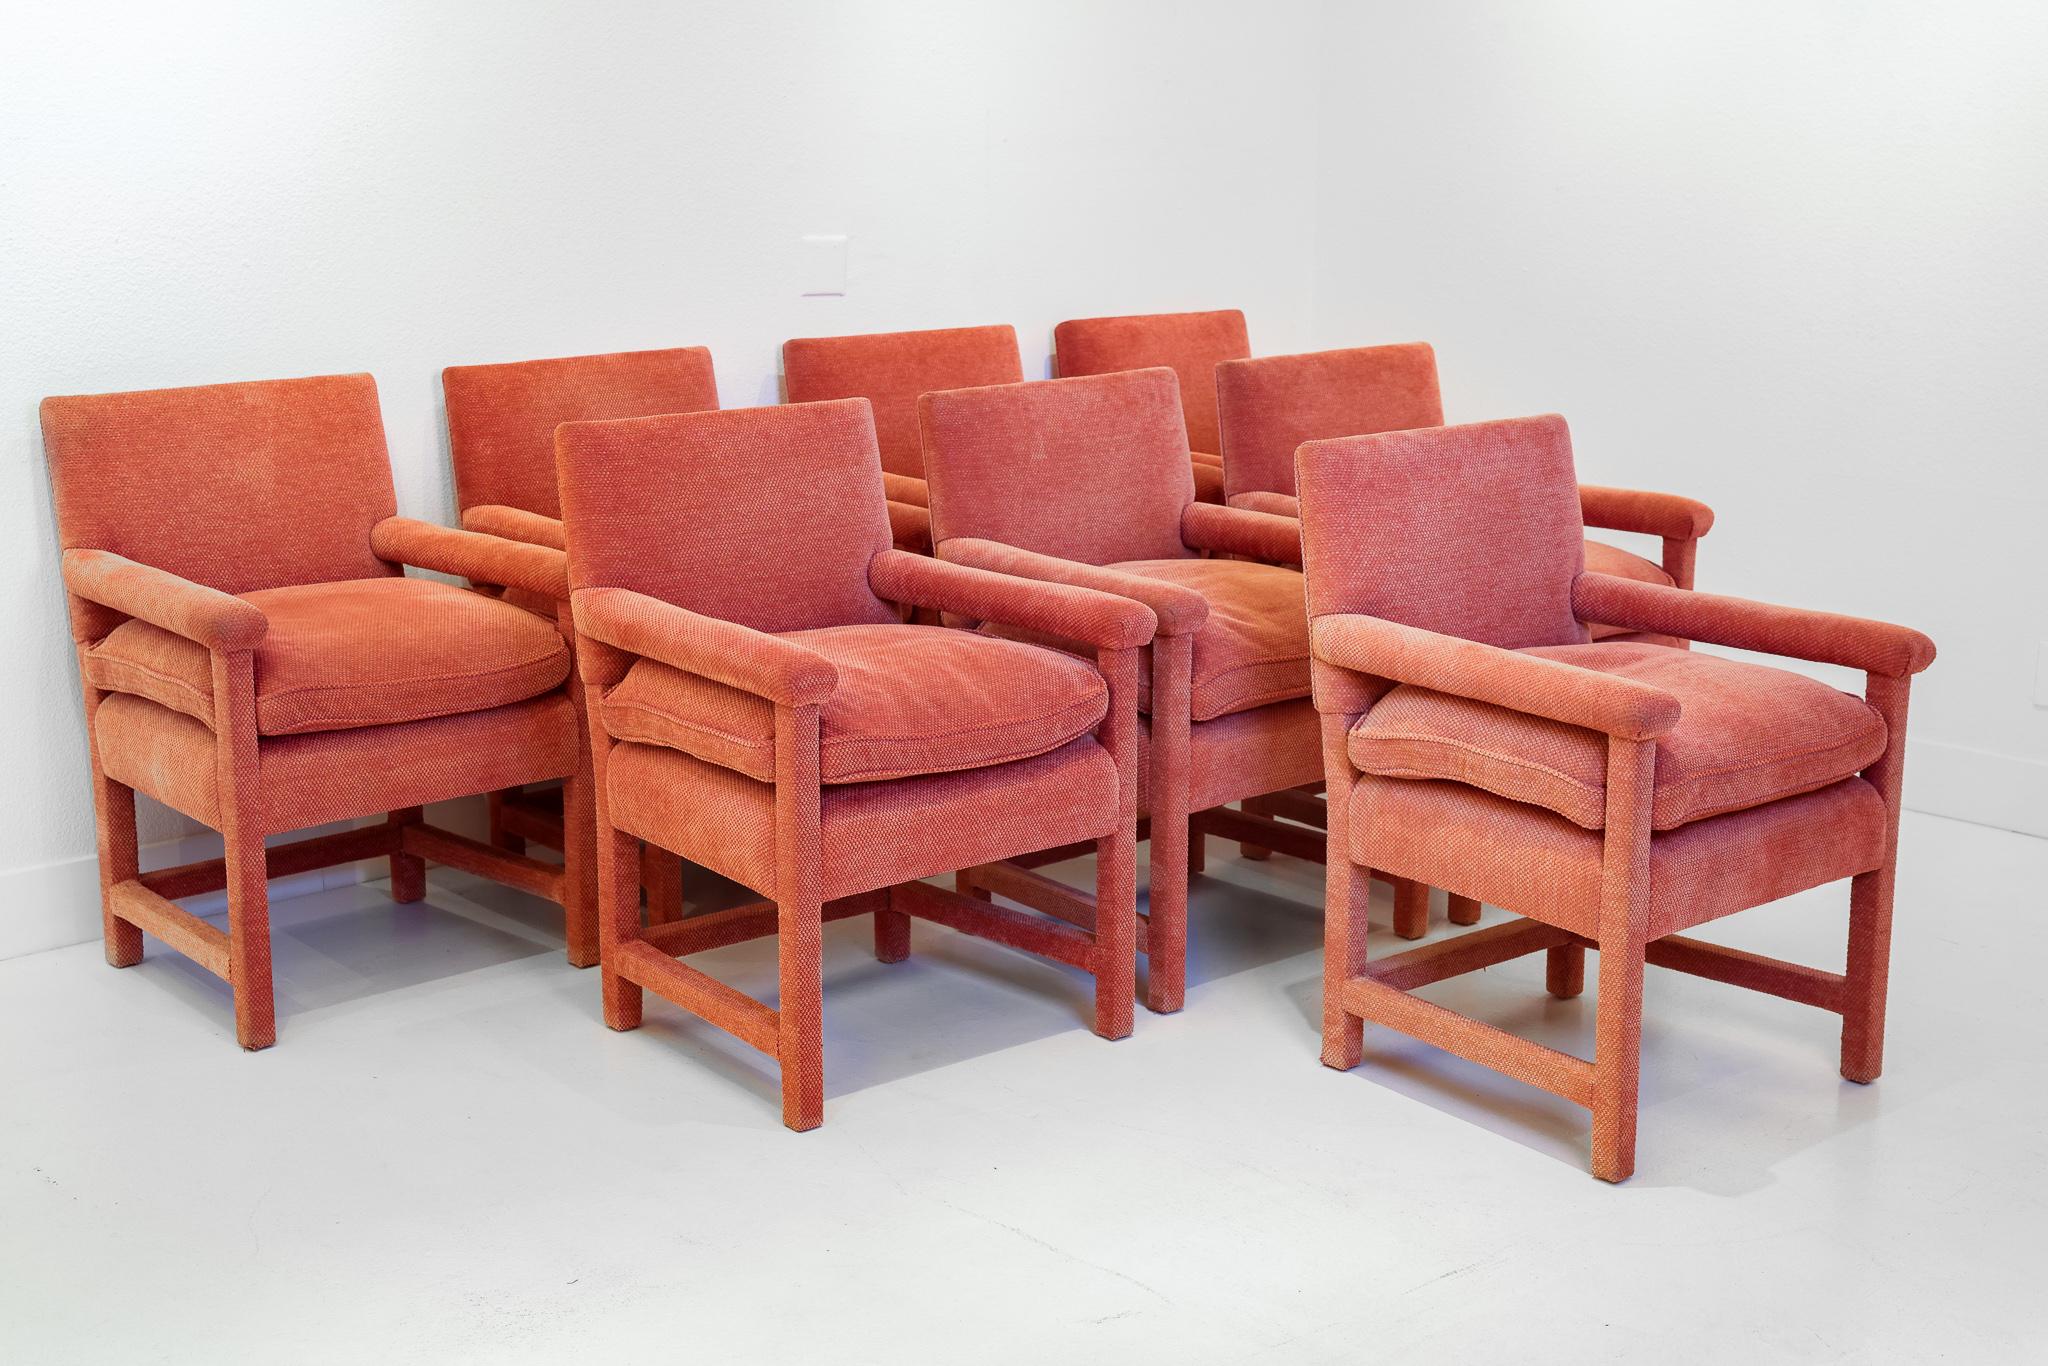 This is a set of 8 fully upholstered dining chairs that came from the estate of James Garner. The chairs are upholstered in a textured salmon colored fabric. The backs, legs, arms, and supporting pieces are all upholstered. The cushion is attached